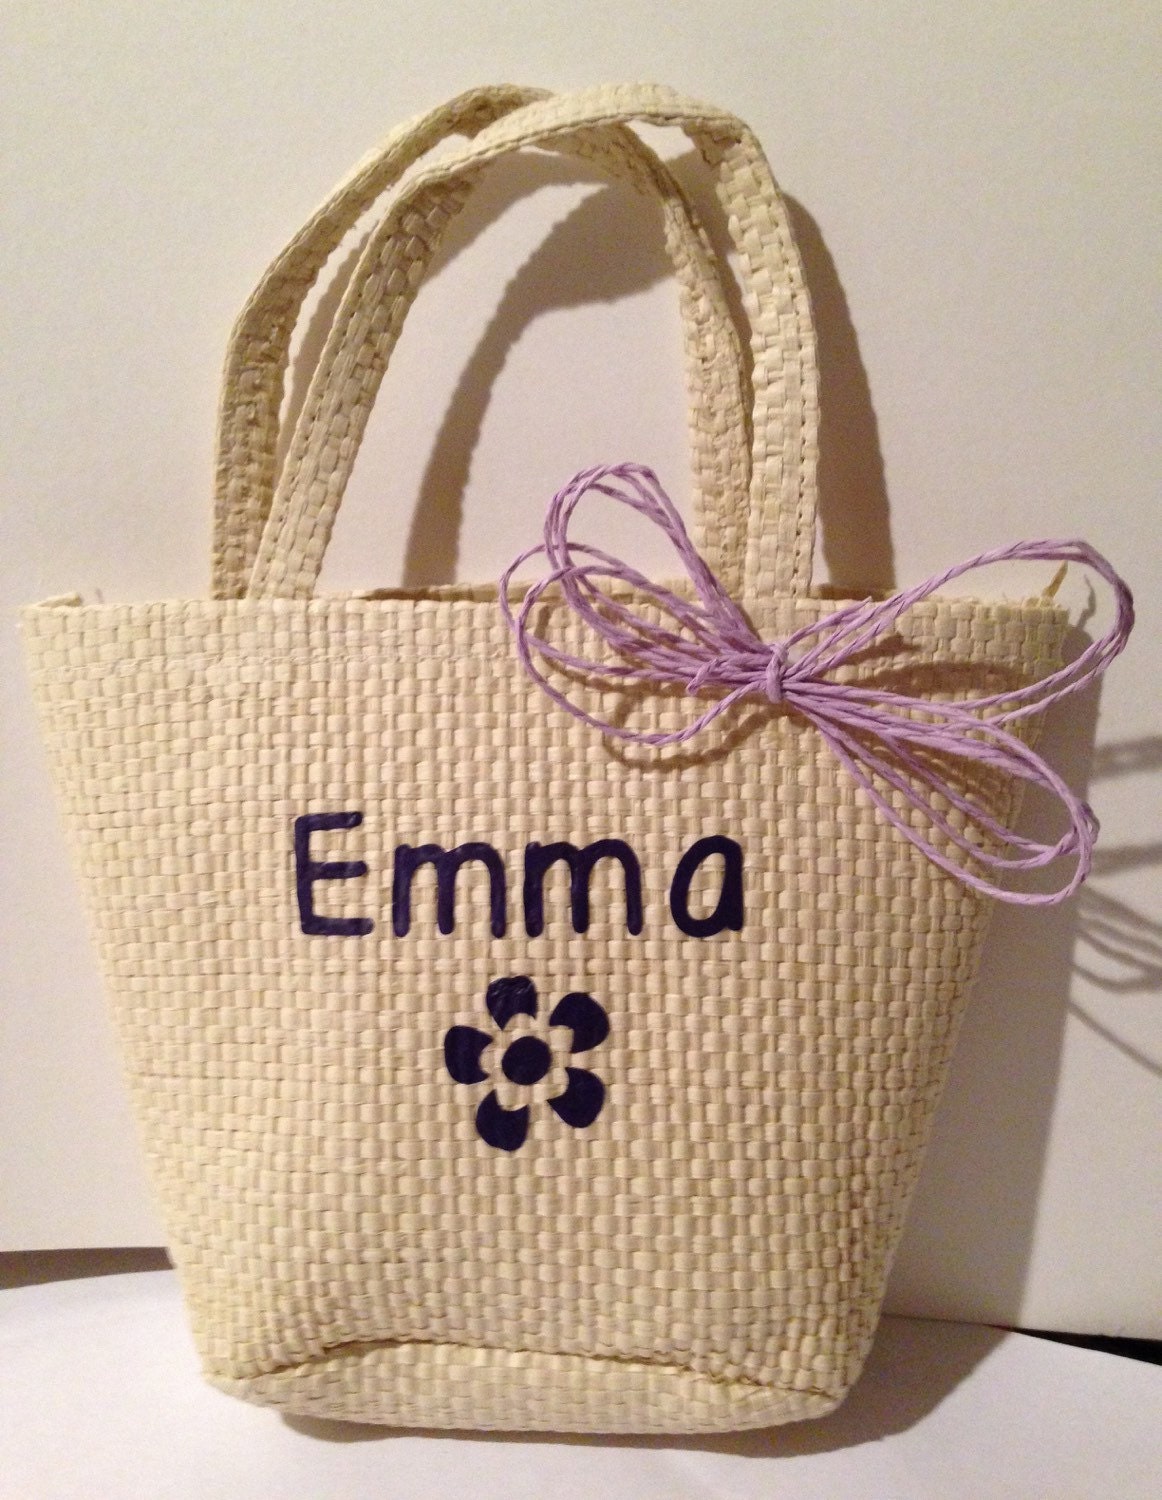 Personalized purse little girls bag name by ElainesCrafts on Etsy